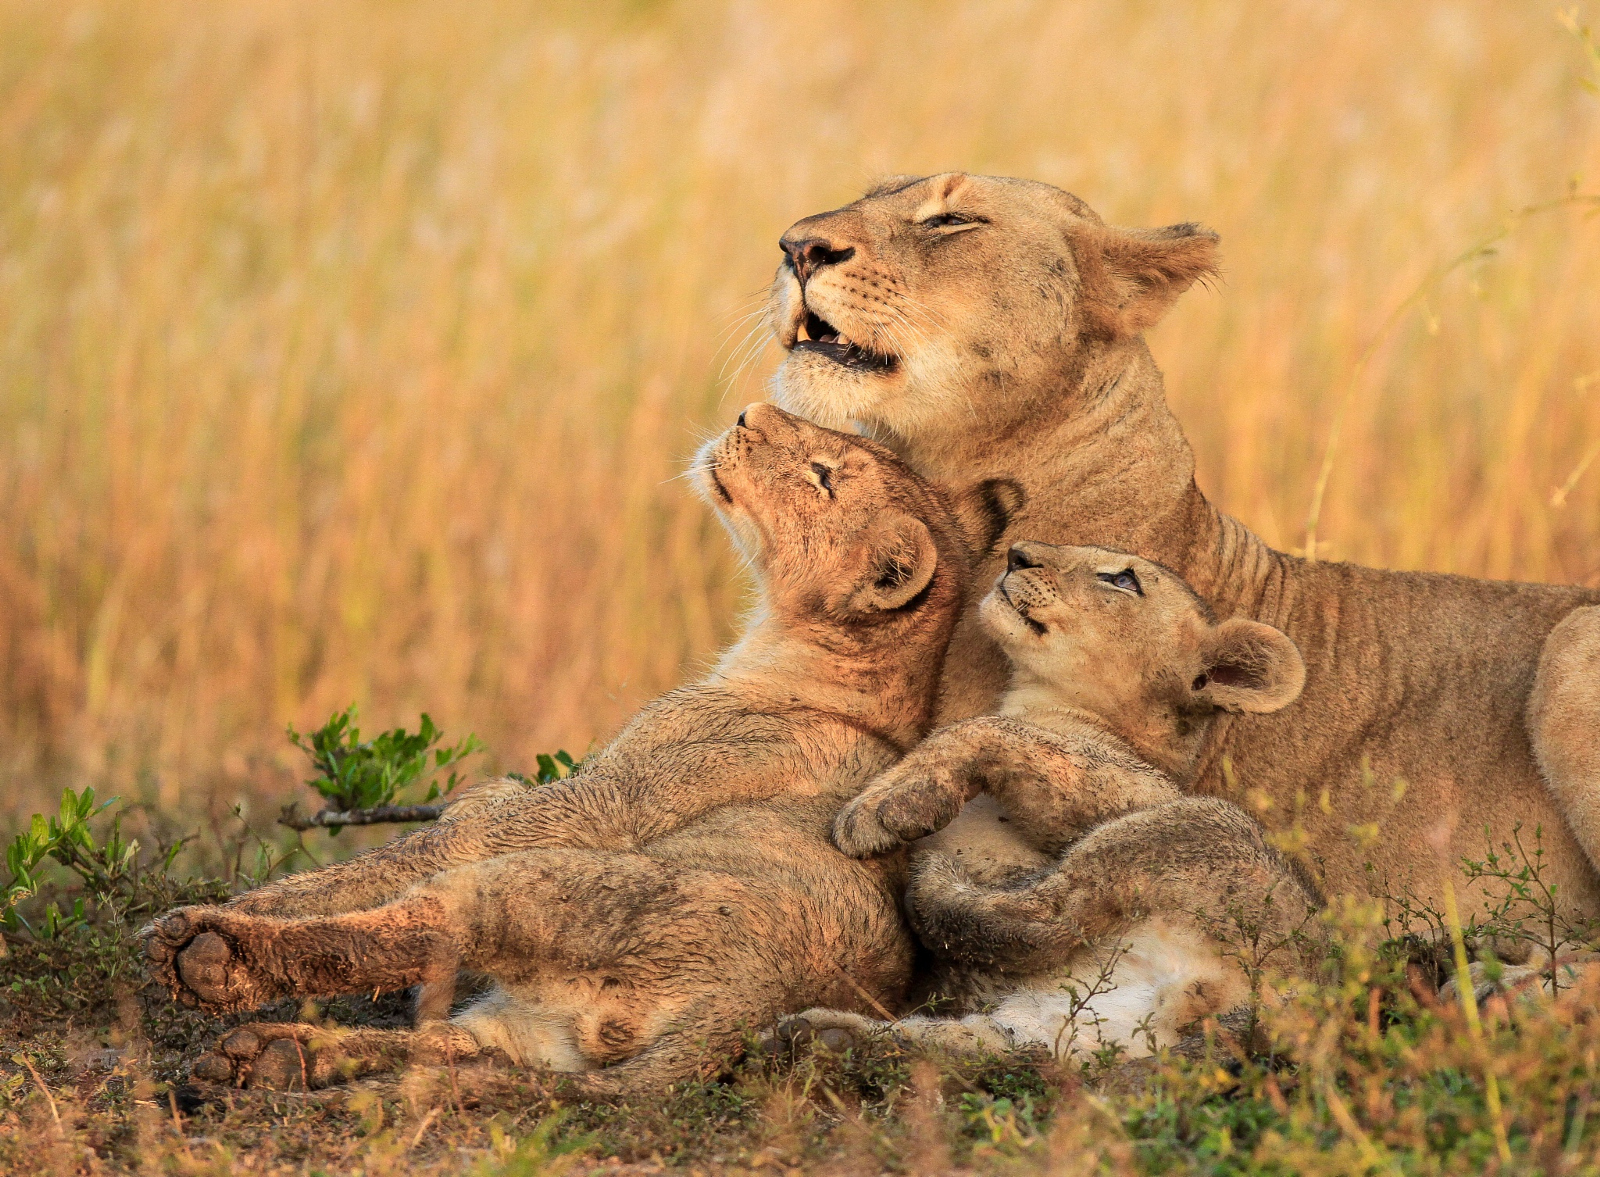 7 Simple Tips for Safely Taking Beautiful Wildlife Photos - 500px